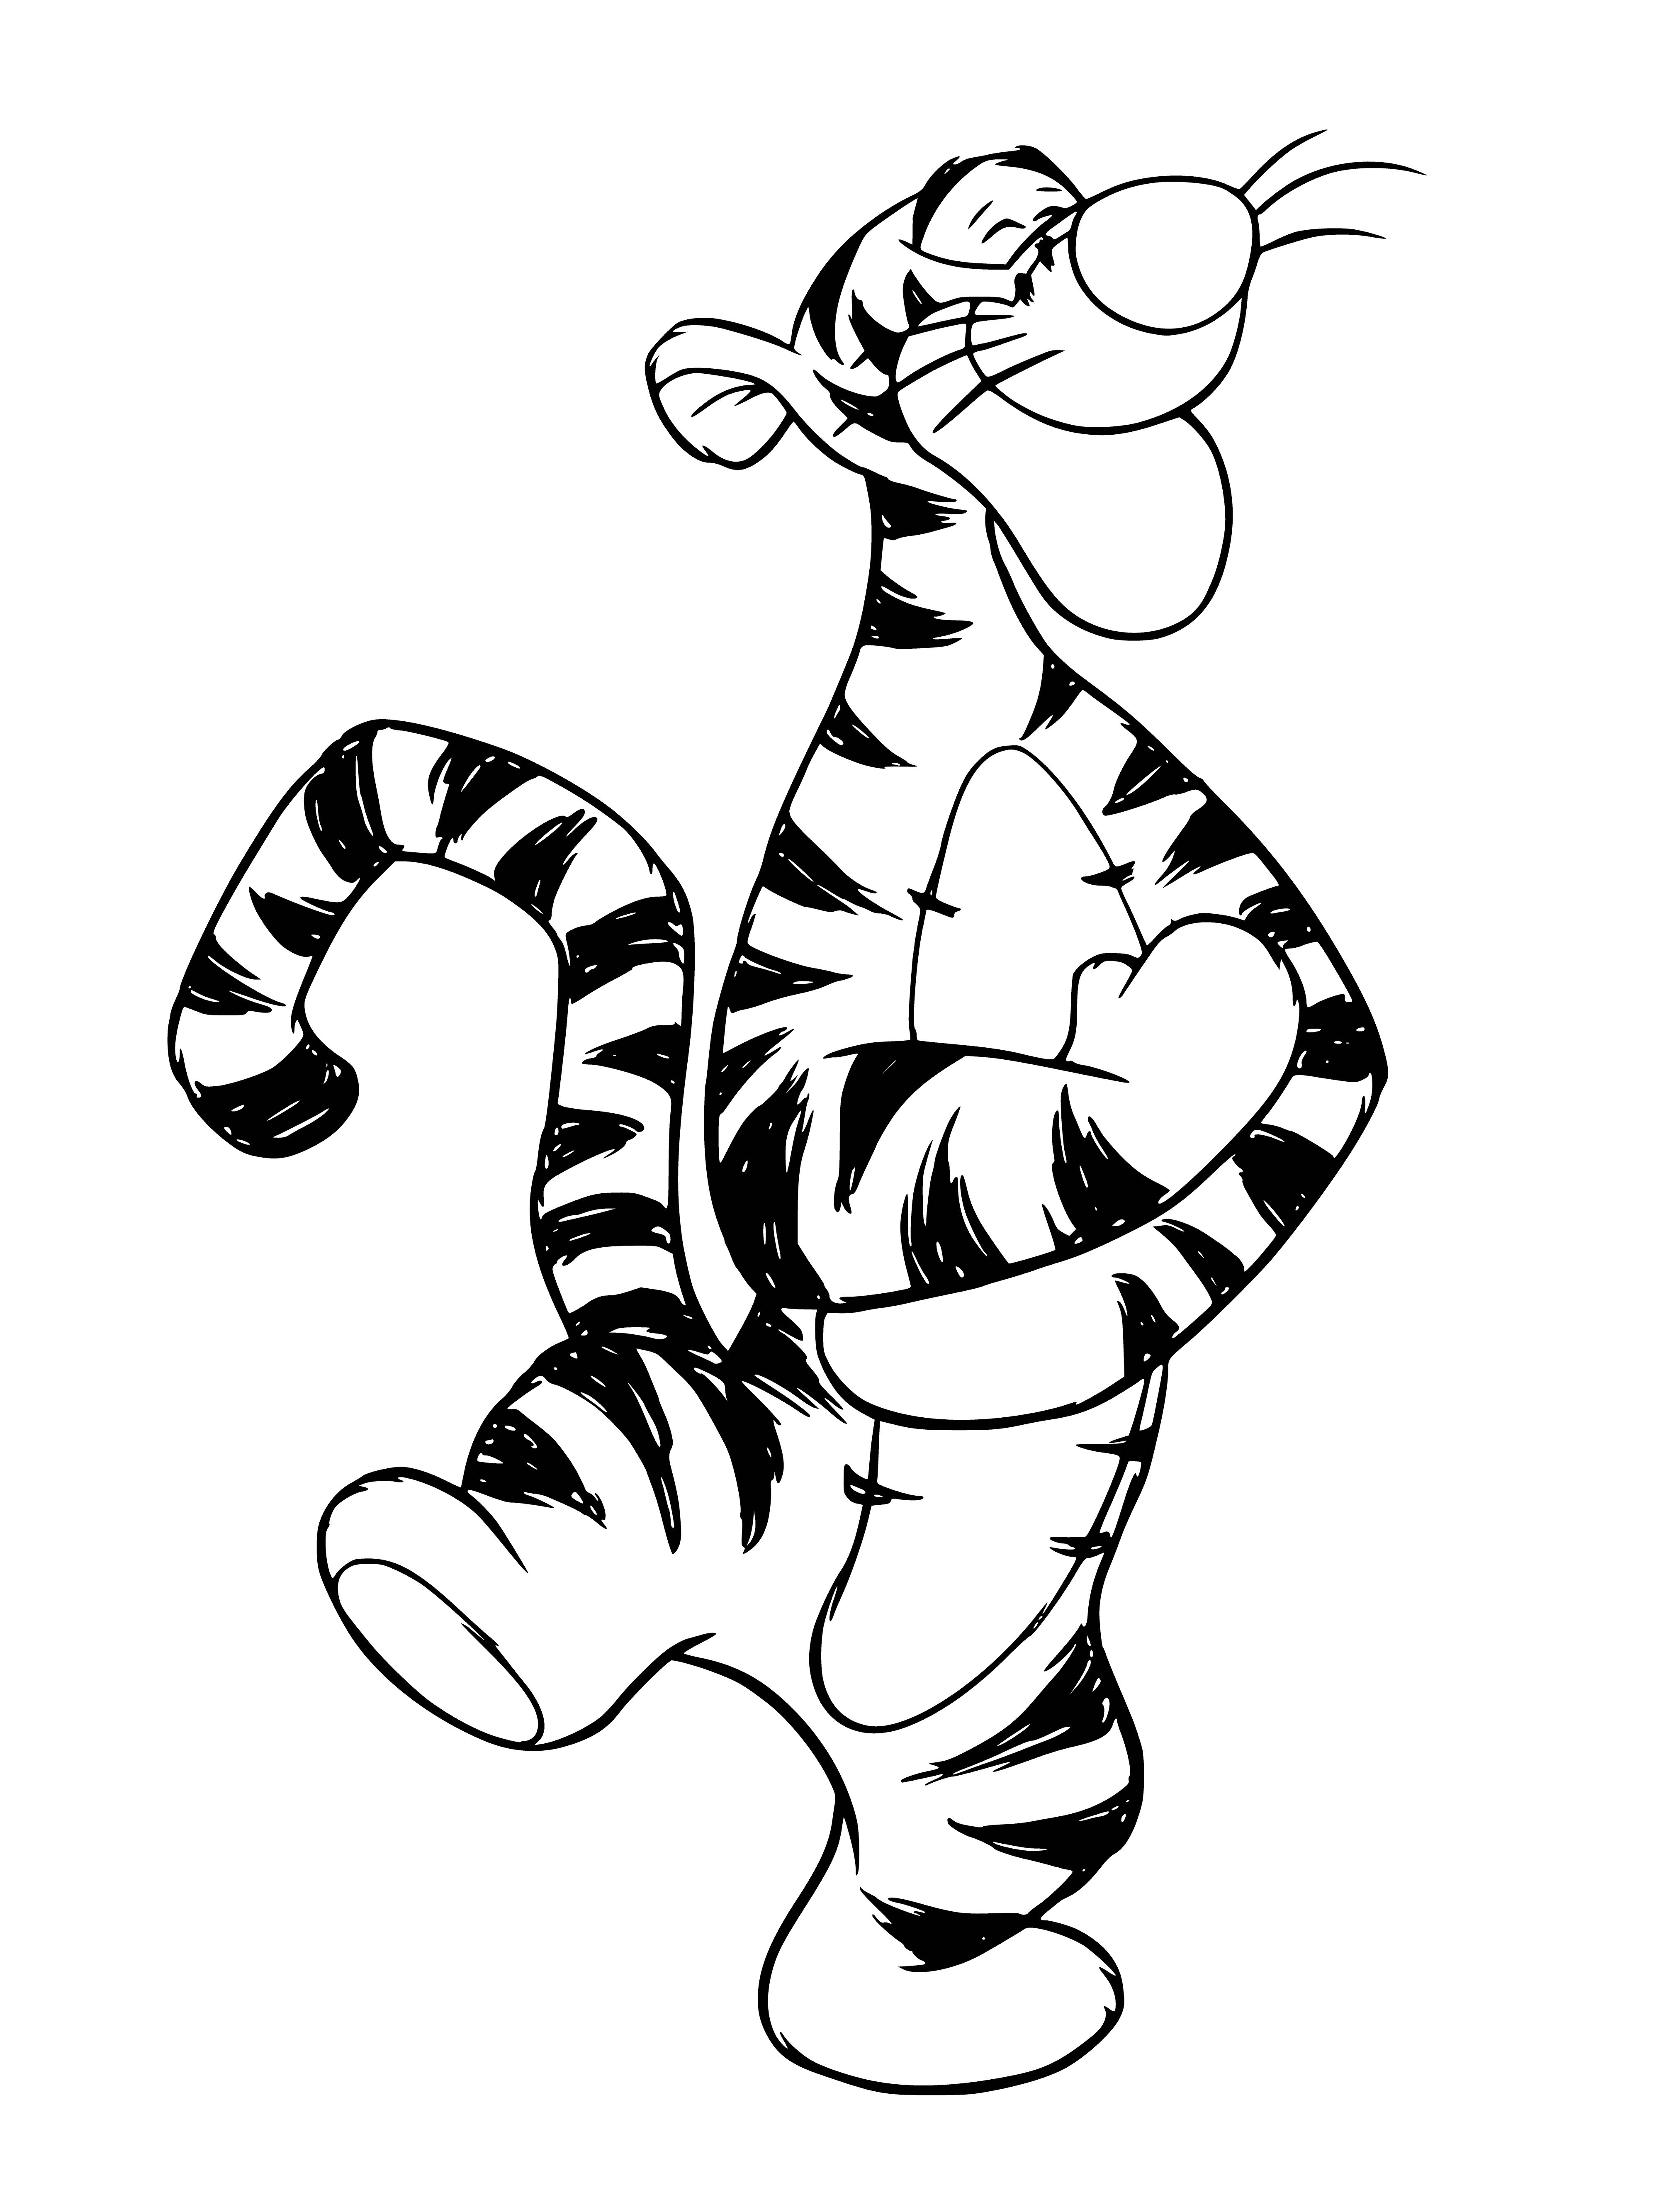 coloring page: Smiling orange tiger with black stripes has arms raised in a V surrounded by green leaves.